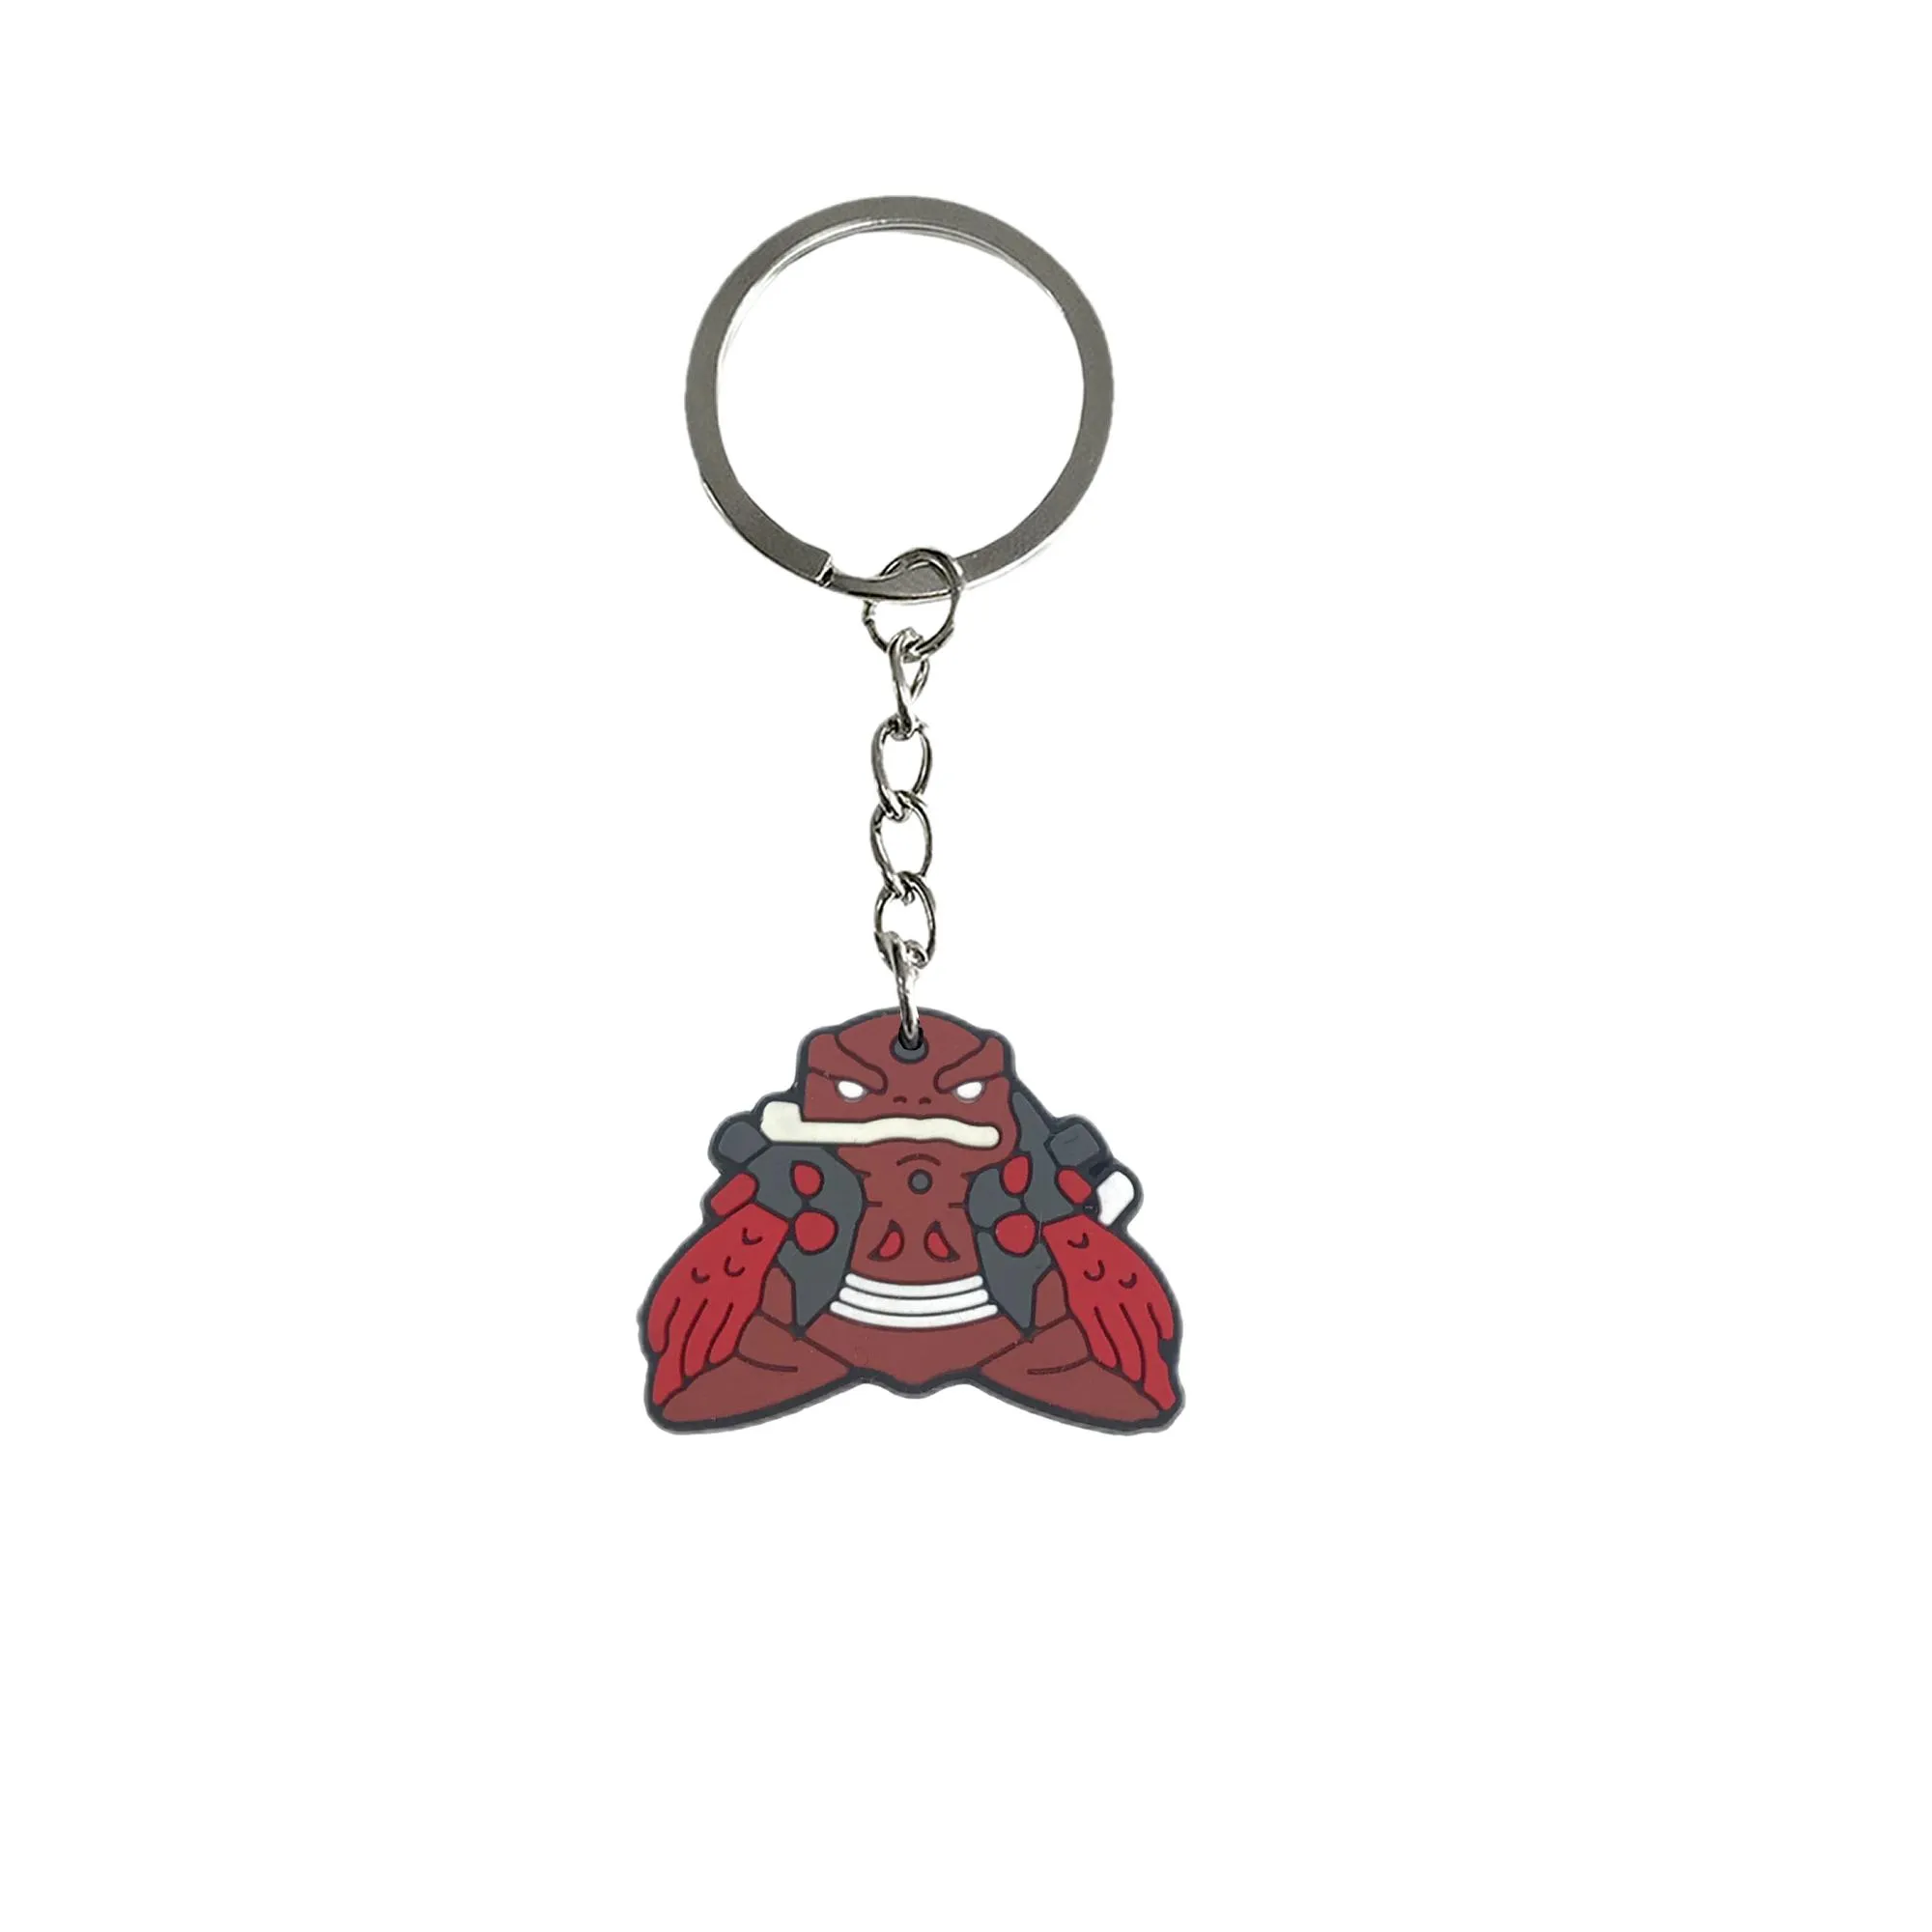  keychain key pendant accessories for bags kids party favors keyring school backpack suitable schoolbag cool colorful anime character with wristlet keychains backpacks